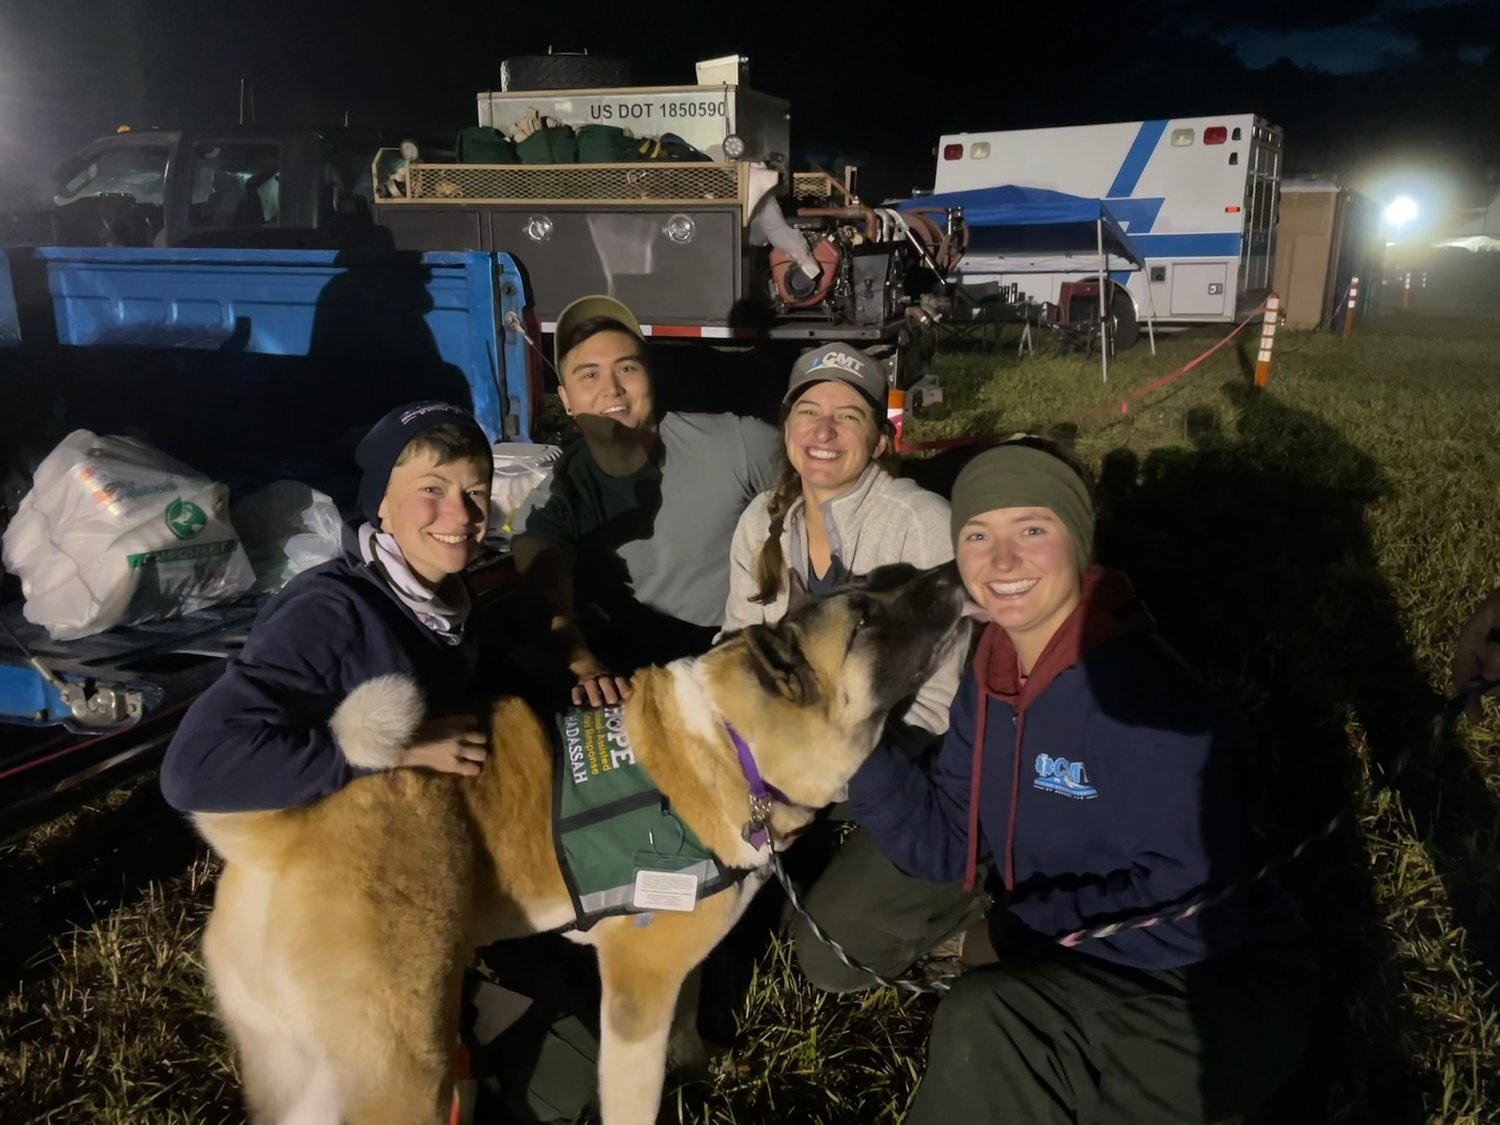 These photographs of therapy dogs from HOPE Animal-Assisted Crisis Response were provided by Gifford Pinchot National Forest Over the Weekend.